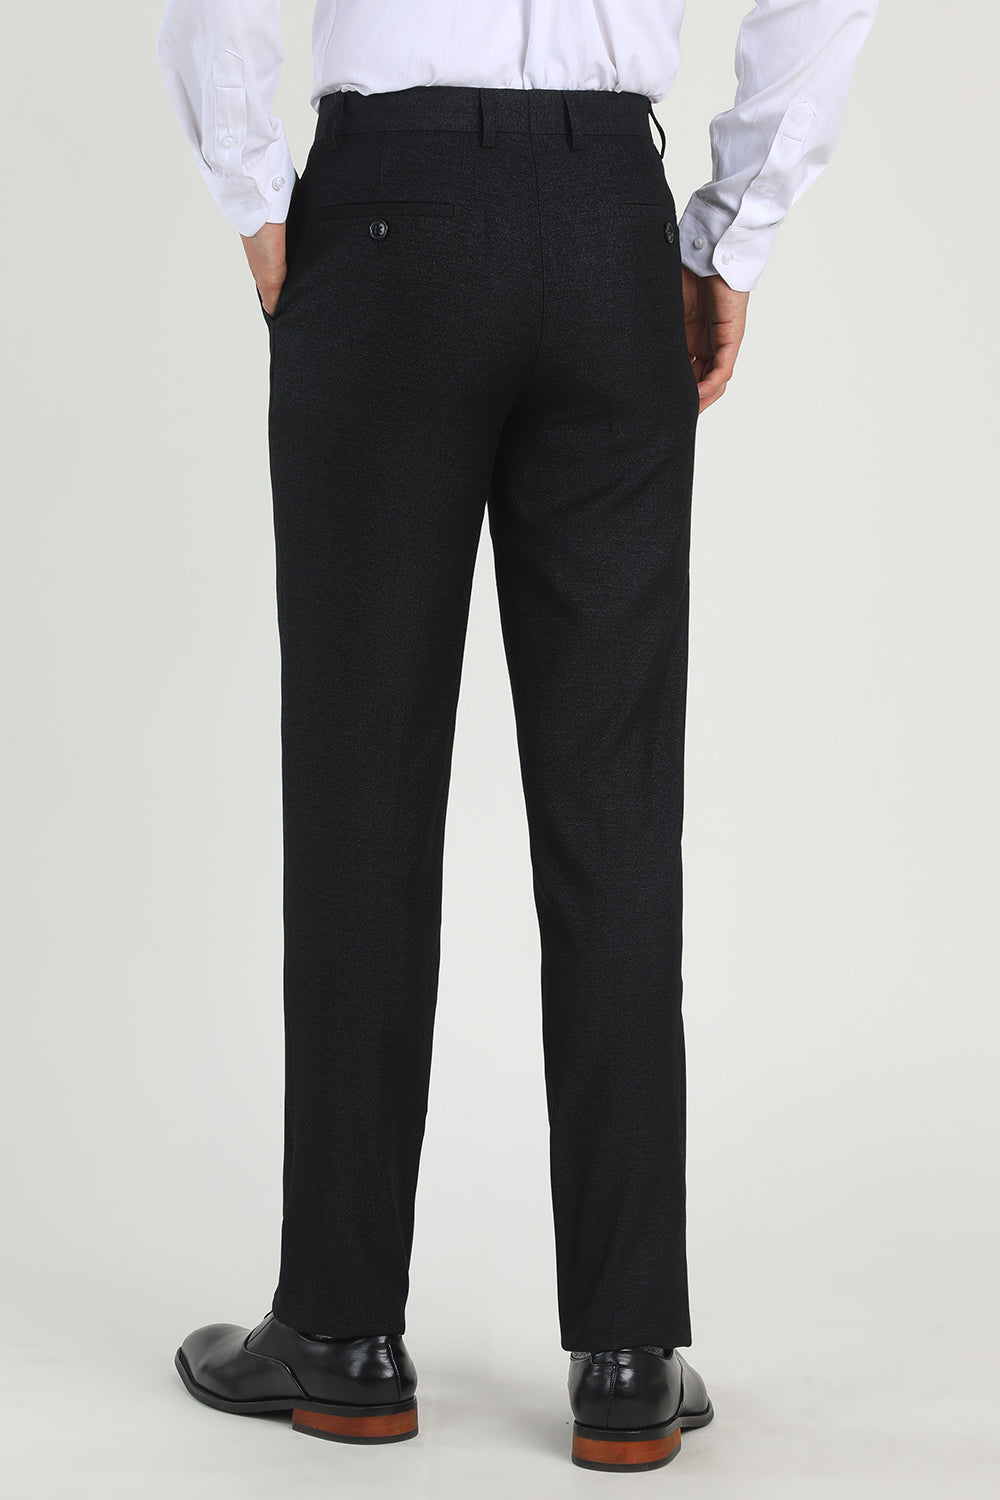 Straight Leg Navy High Waisted Suit Pants Mens